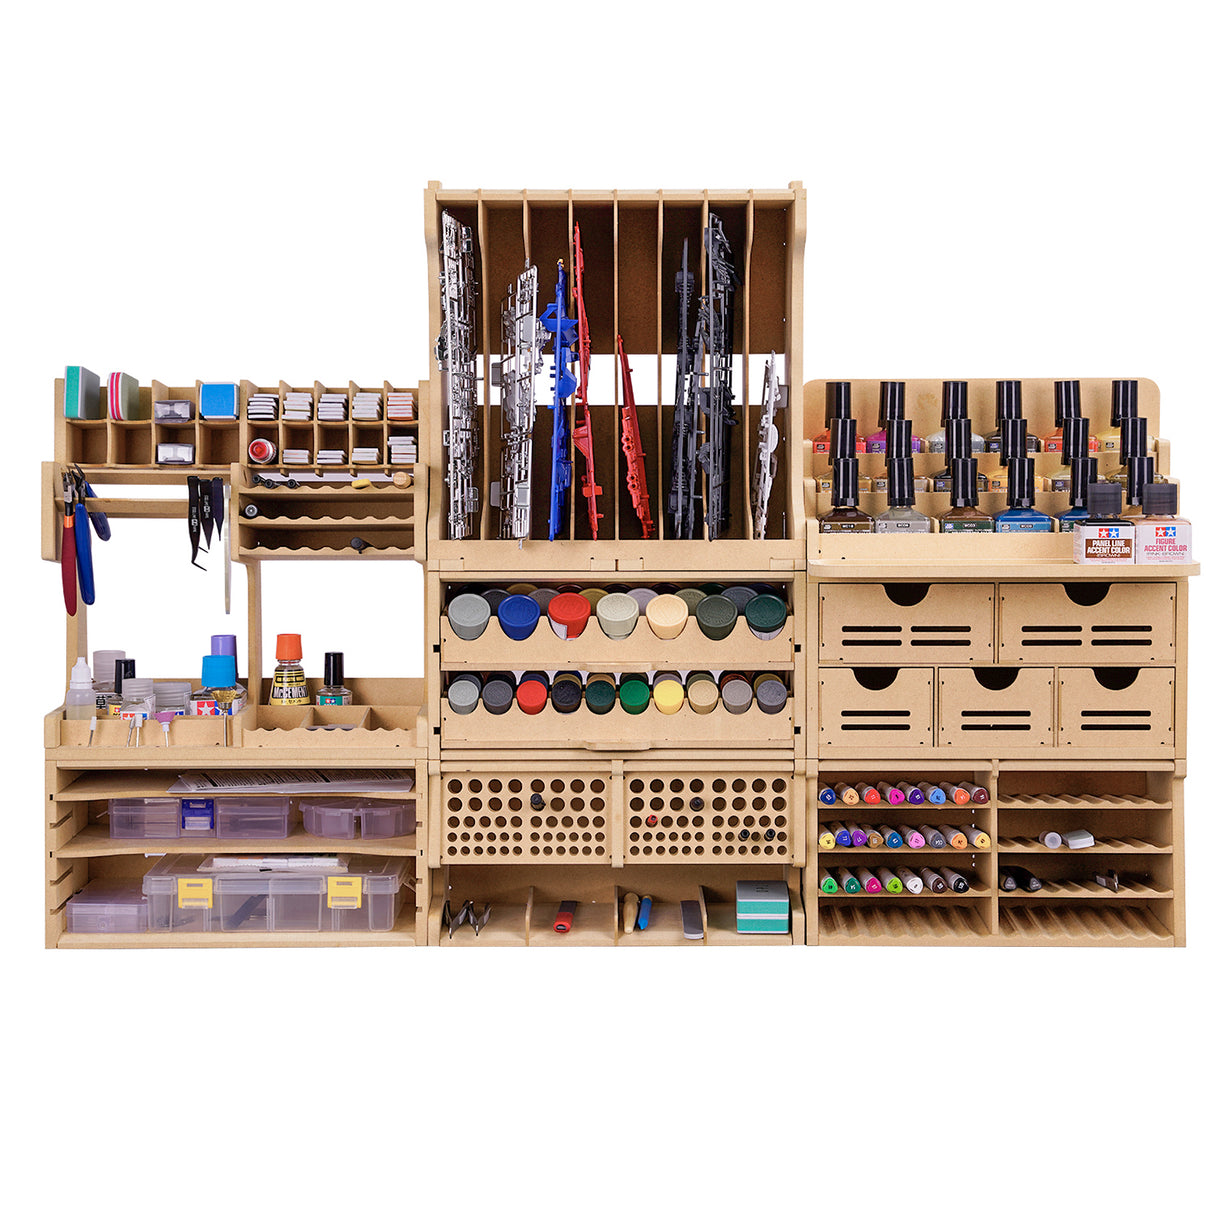 Paint storage rack for model painting, compatible with several